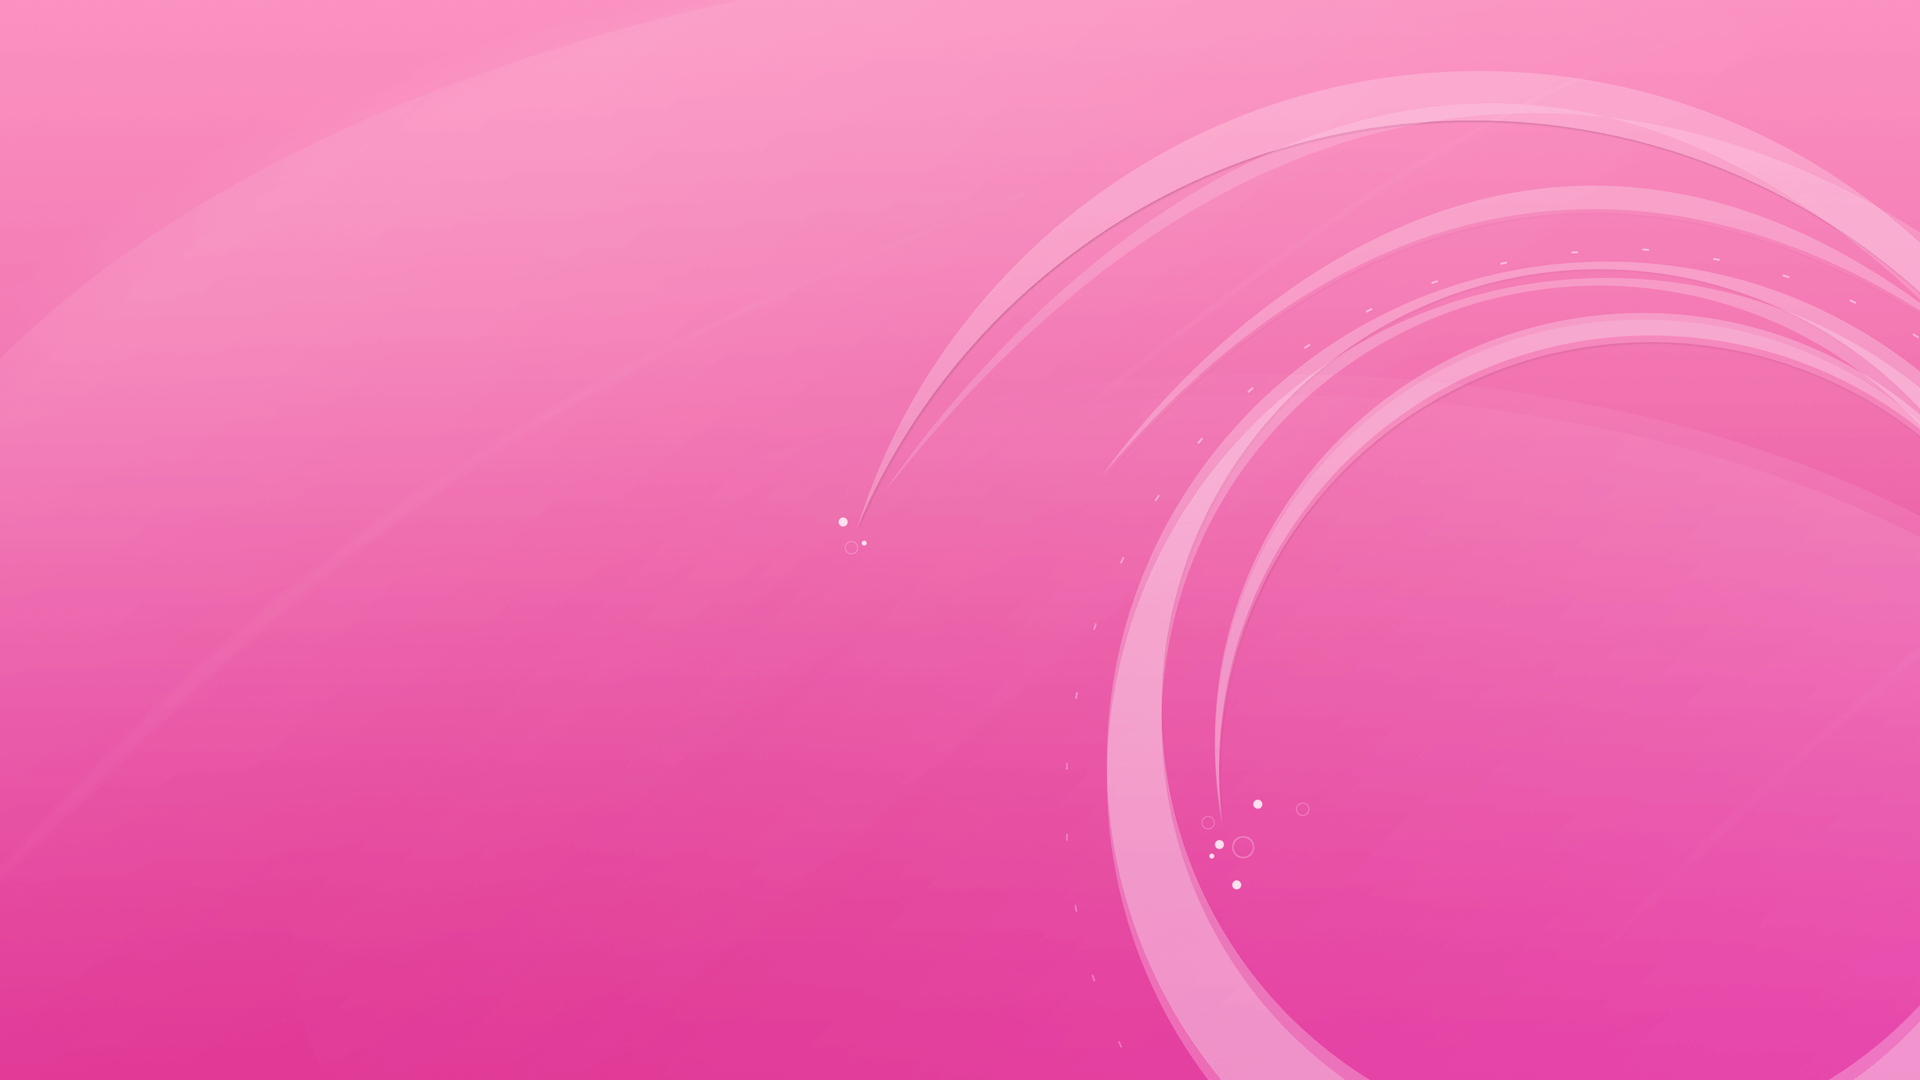 High Resolution Pink Wallpapers - Top Free High Resolution Pink